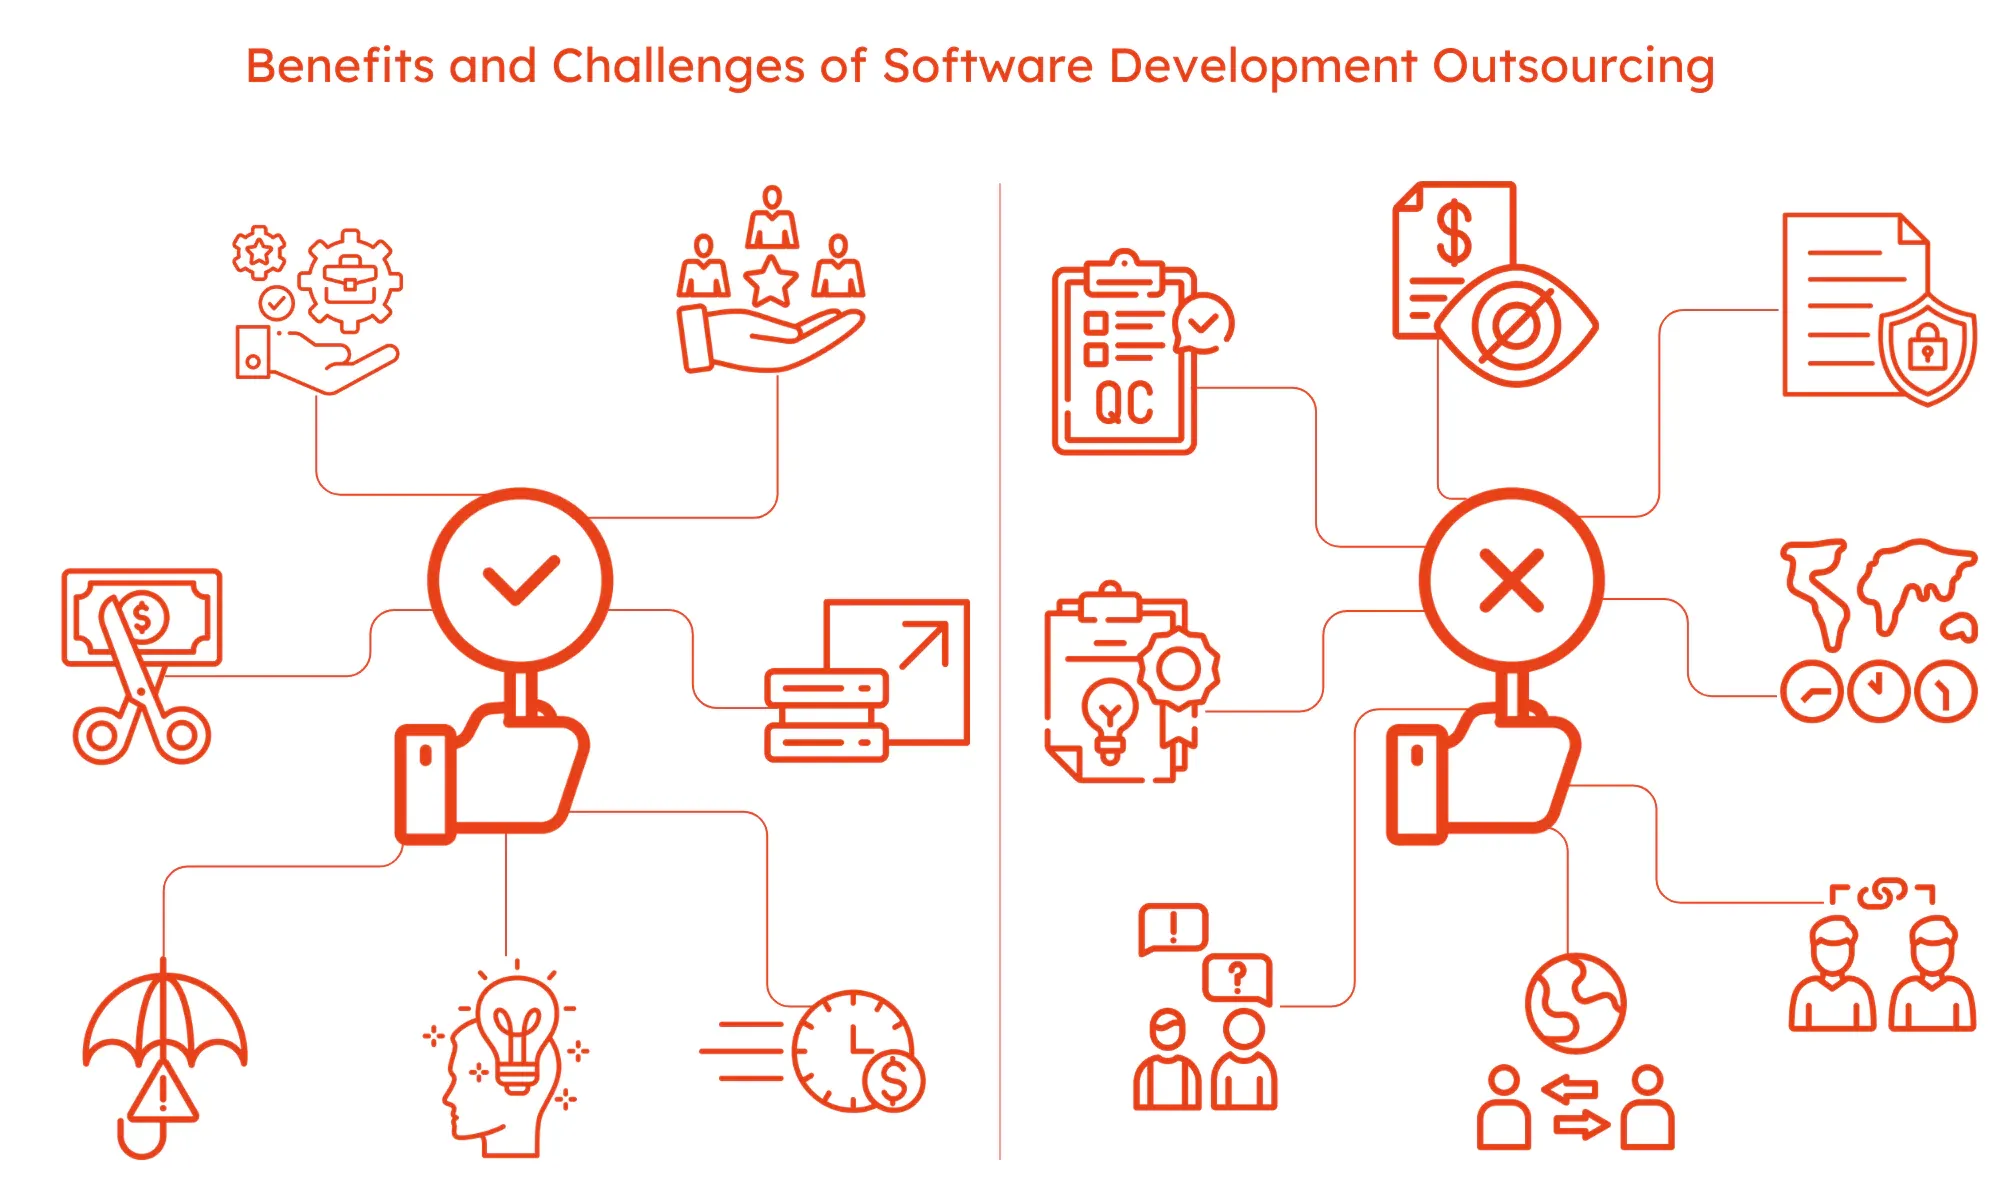 Benefits and Challenges of Software Development Outsourcing